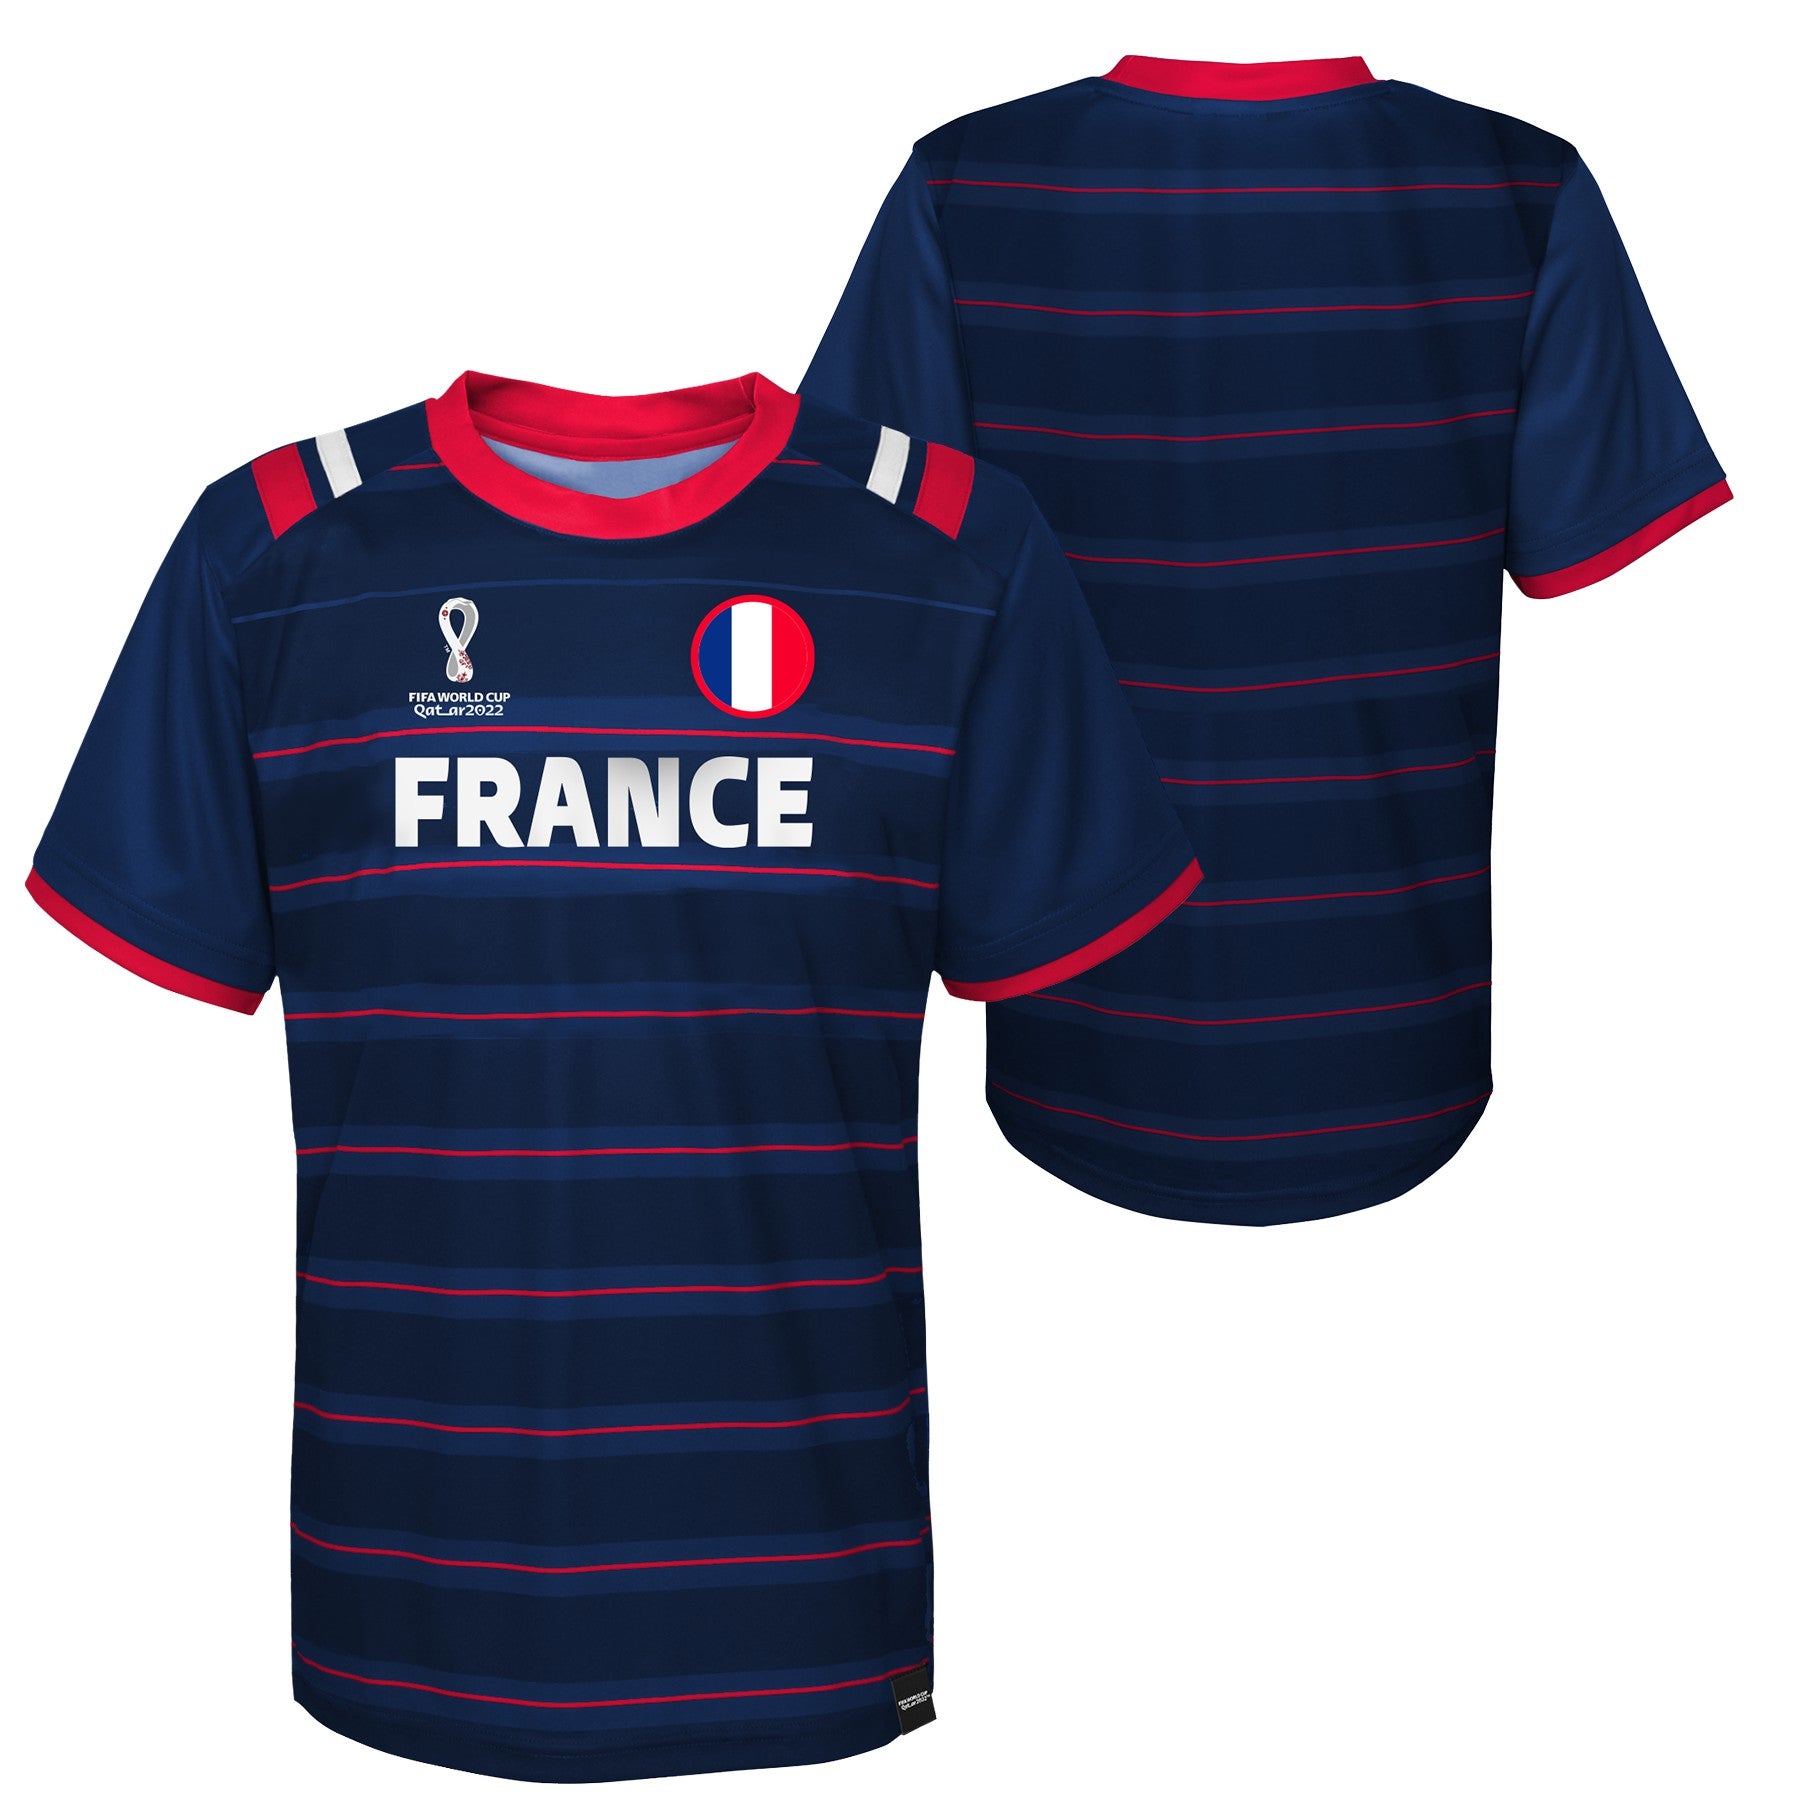 France FIFA Jersey Cup 2022 Official World Qatar